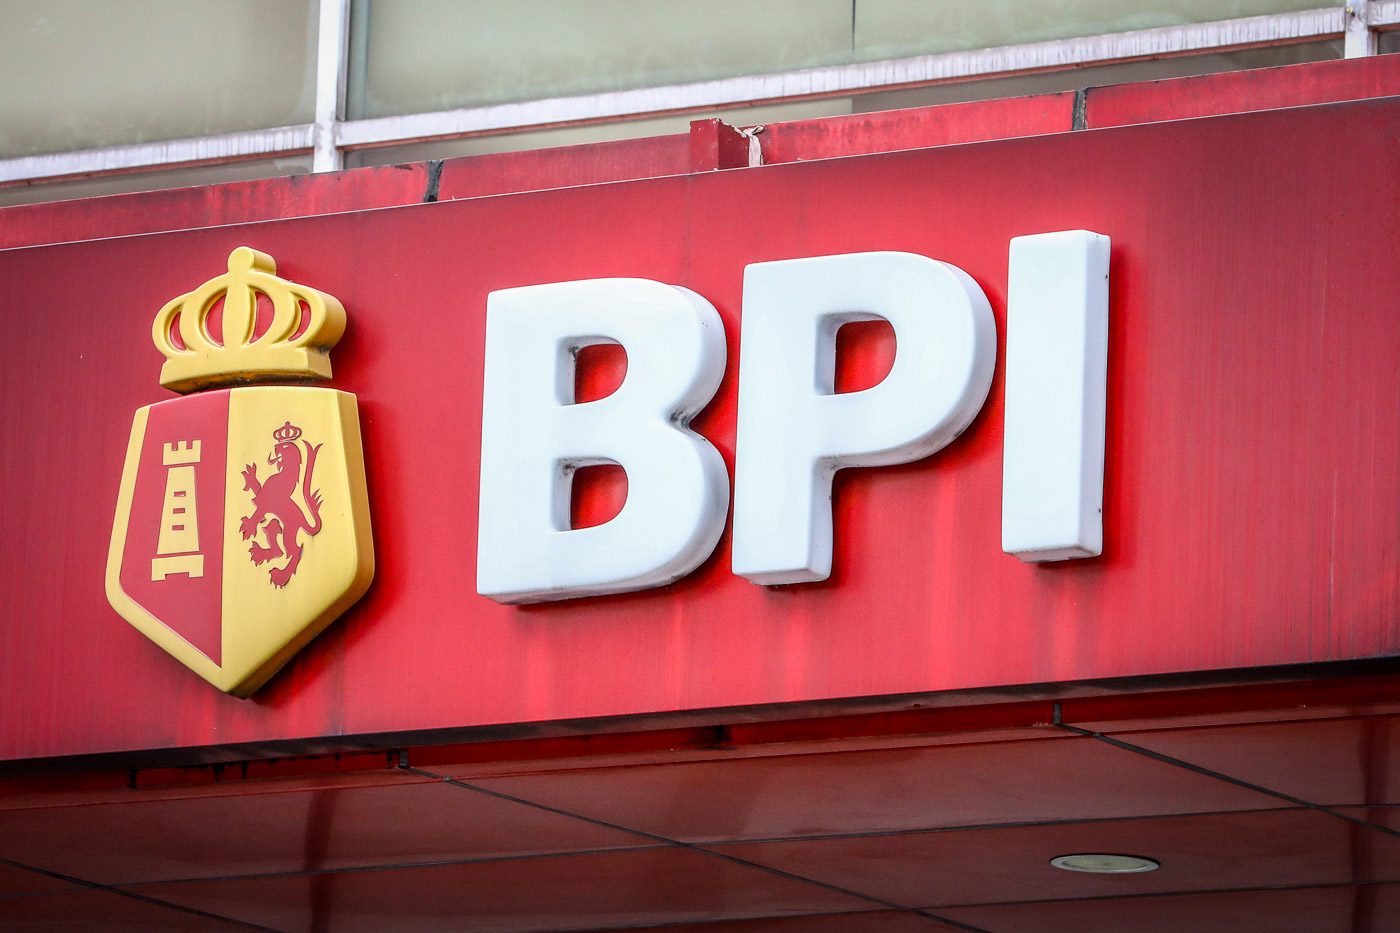 BPI hits record net income of P39.6B in 2022, beating pre-pandemic levels